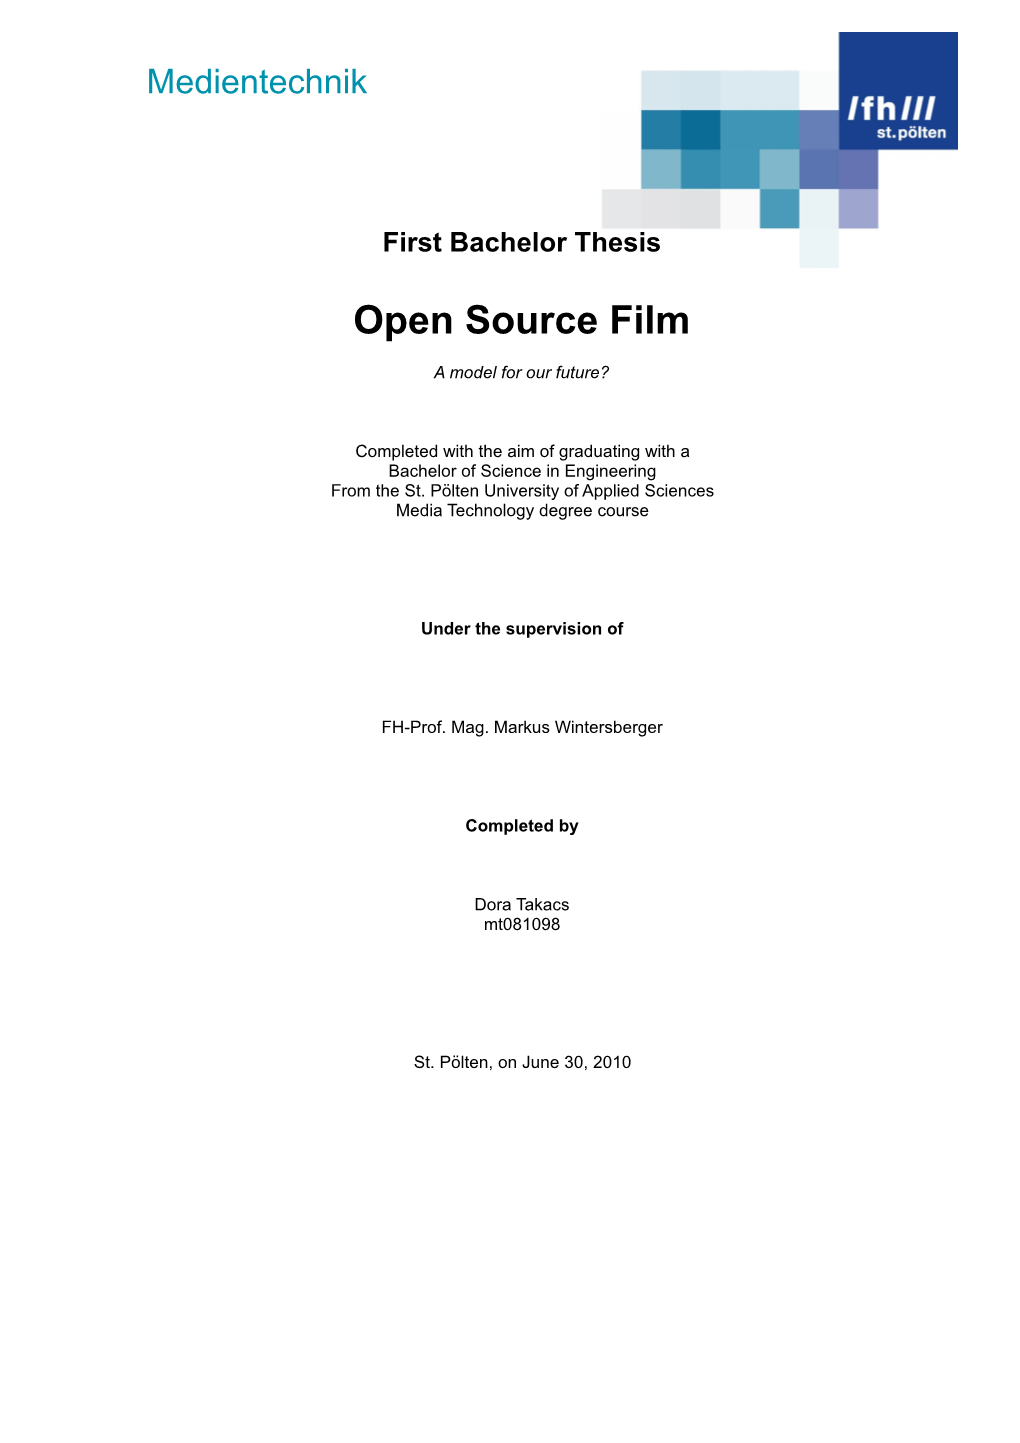 Open Source Film a Model for Our Future?